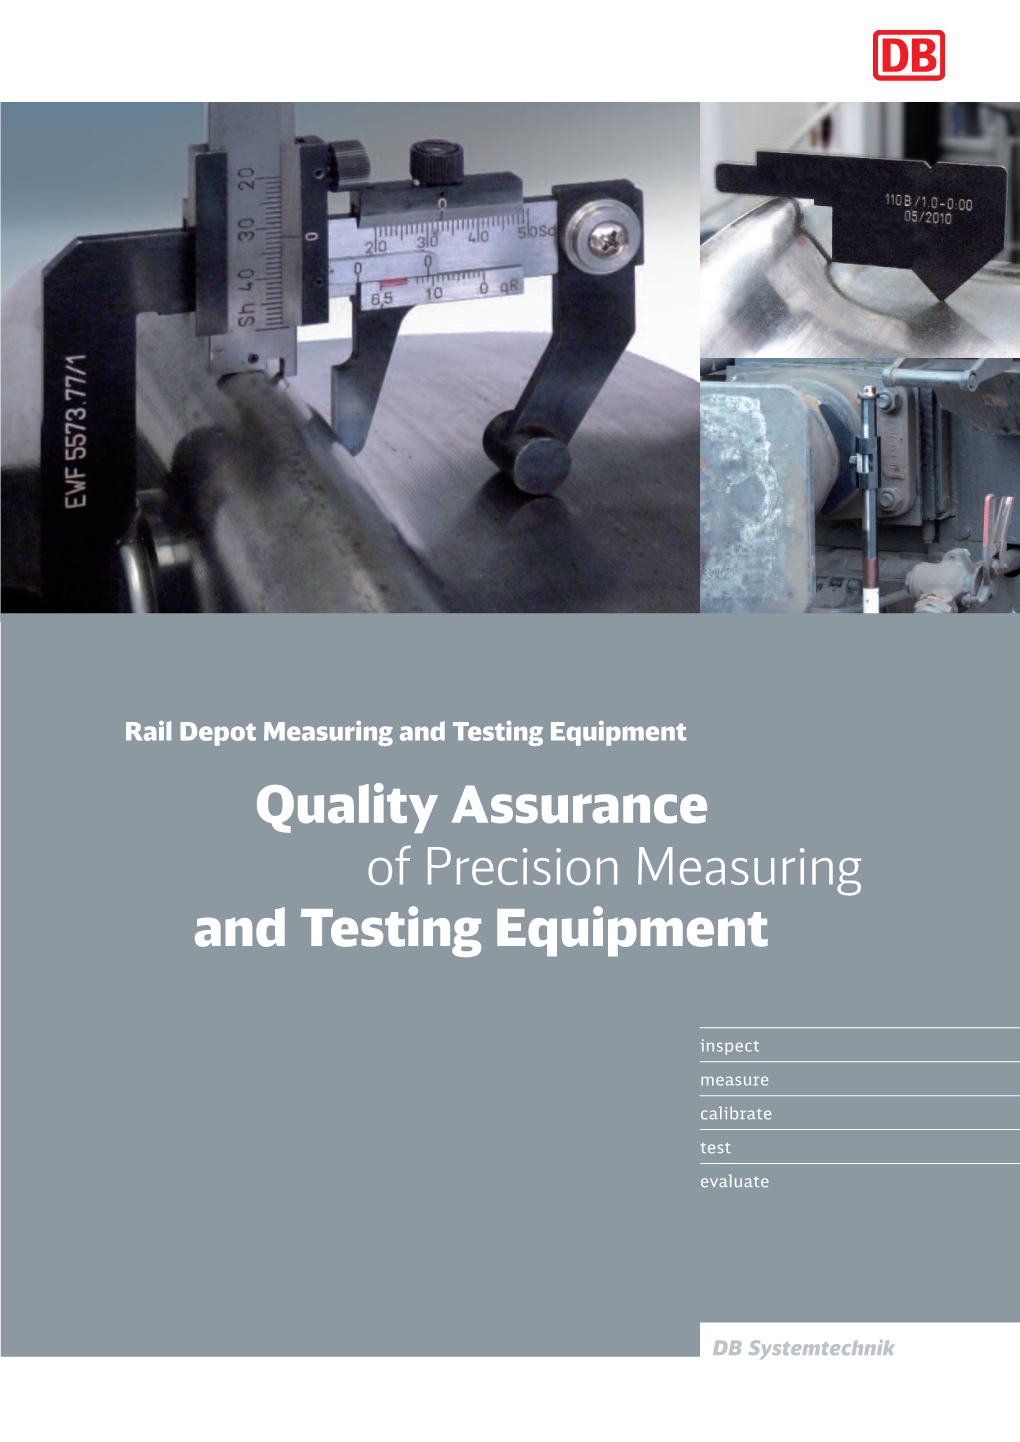 Quality Assurance of Precision Measuring and Testing Equipment